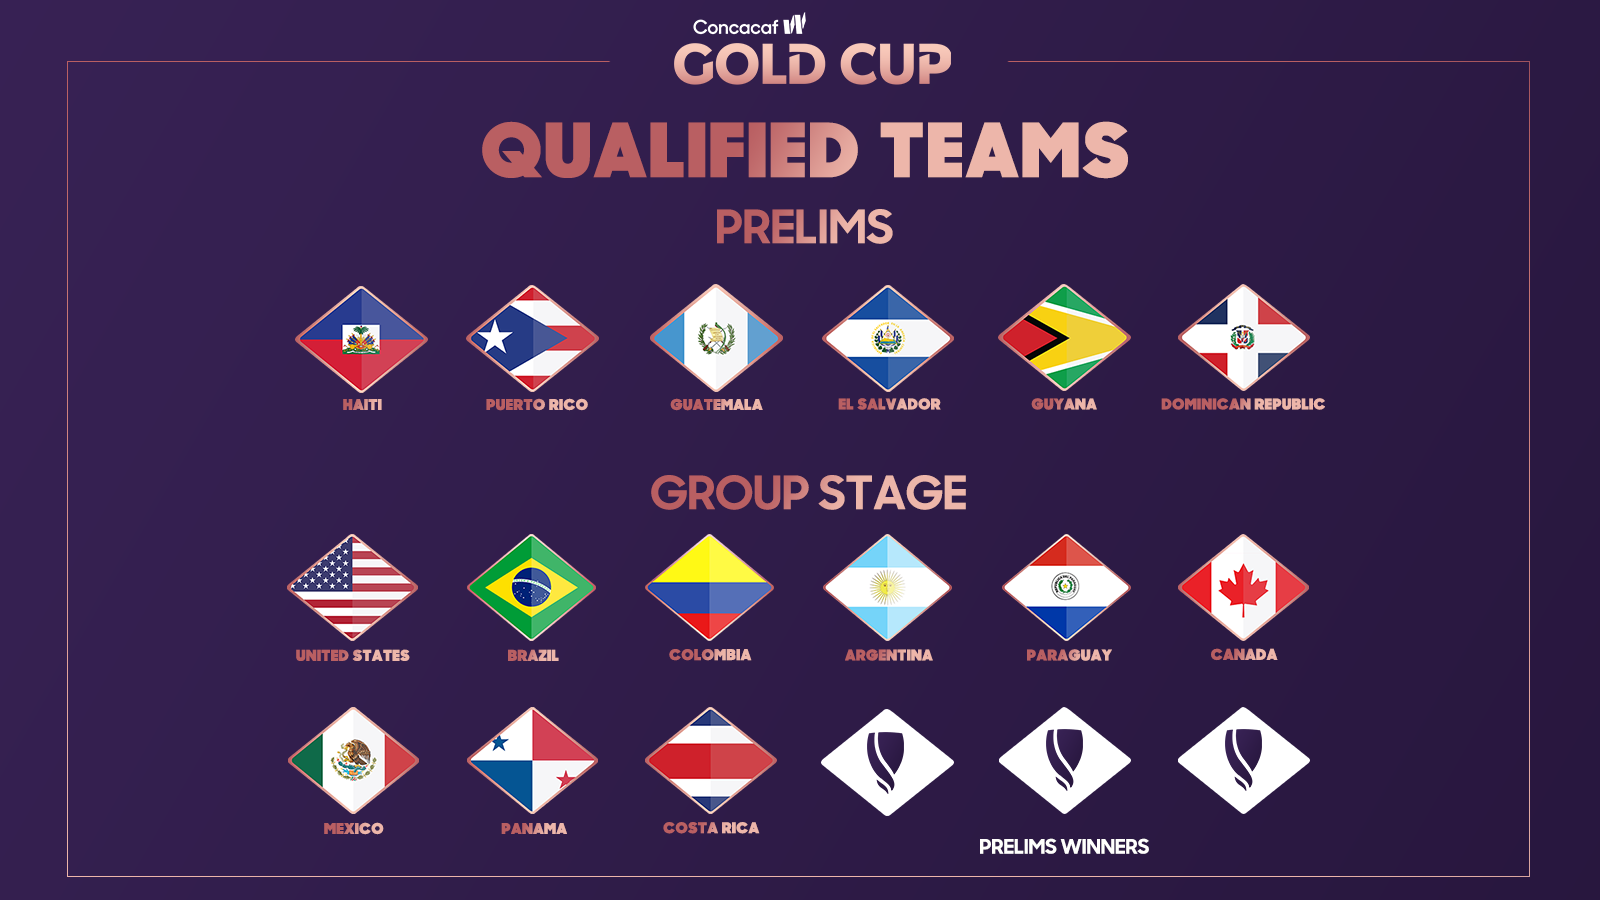 Concacaf confirms 2024 Concacaf W Gold Cup participating women's